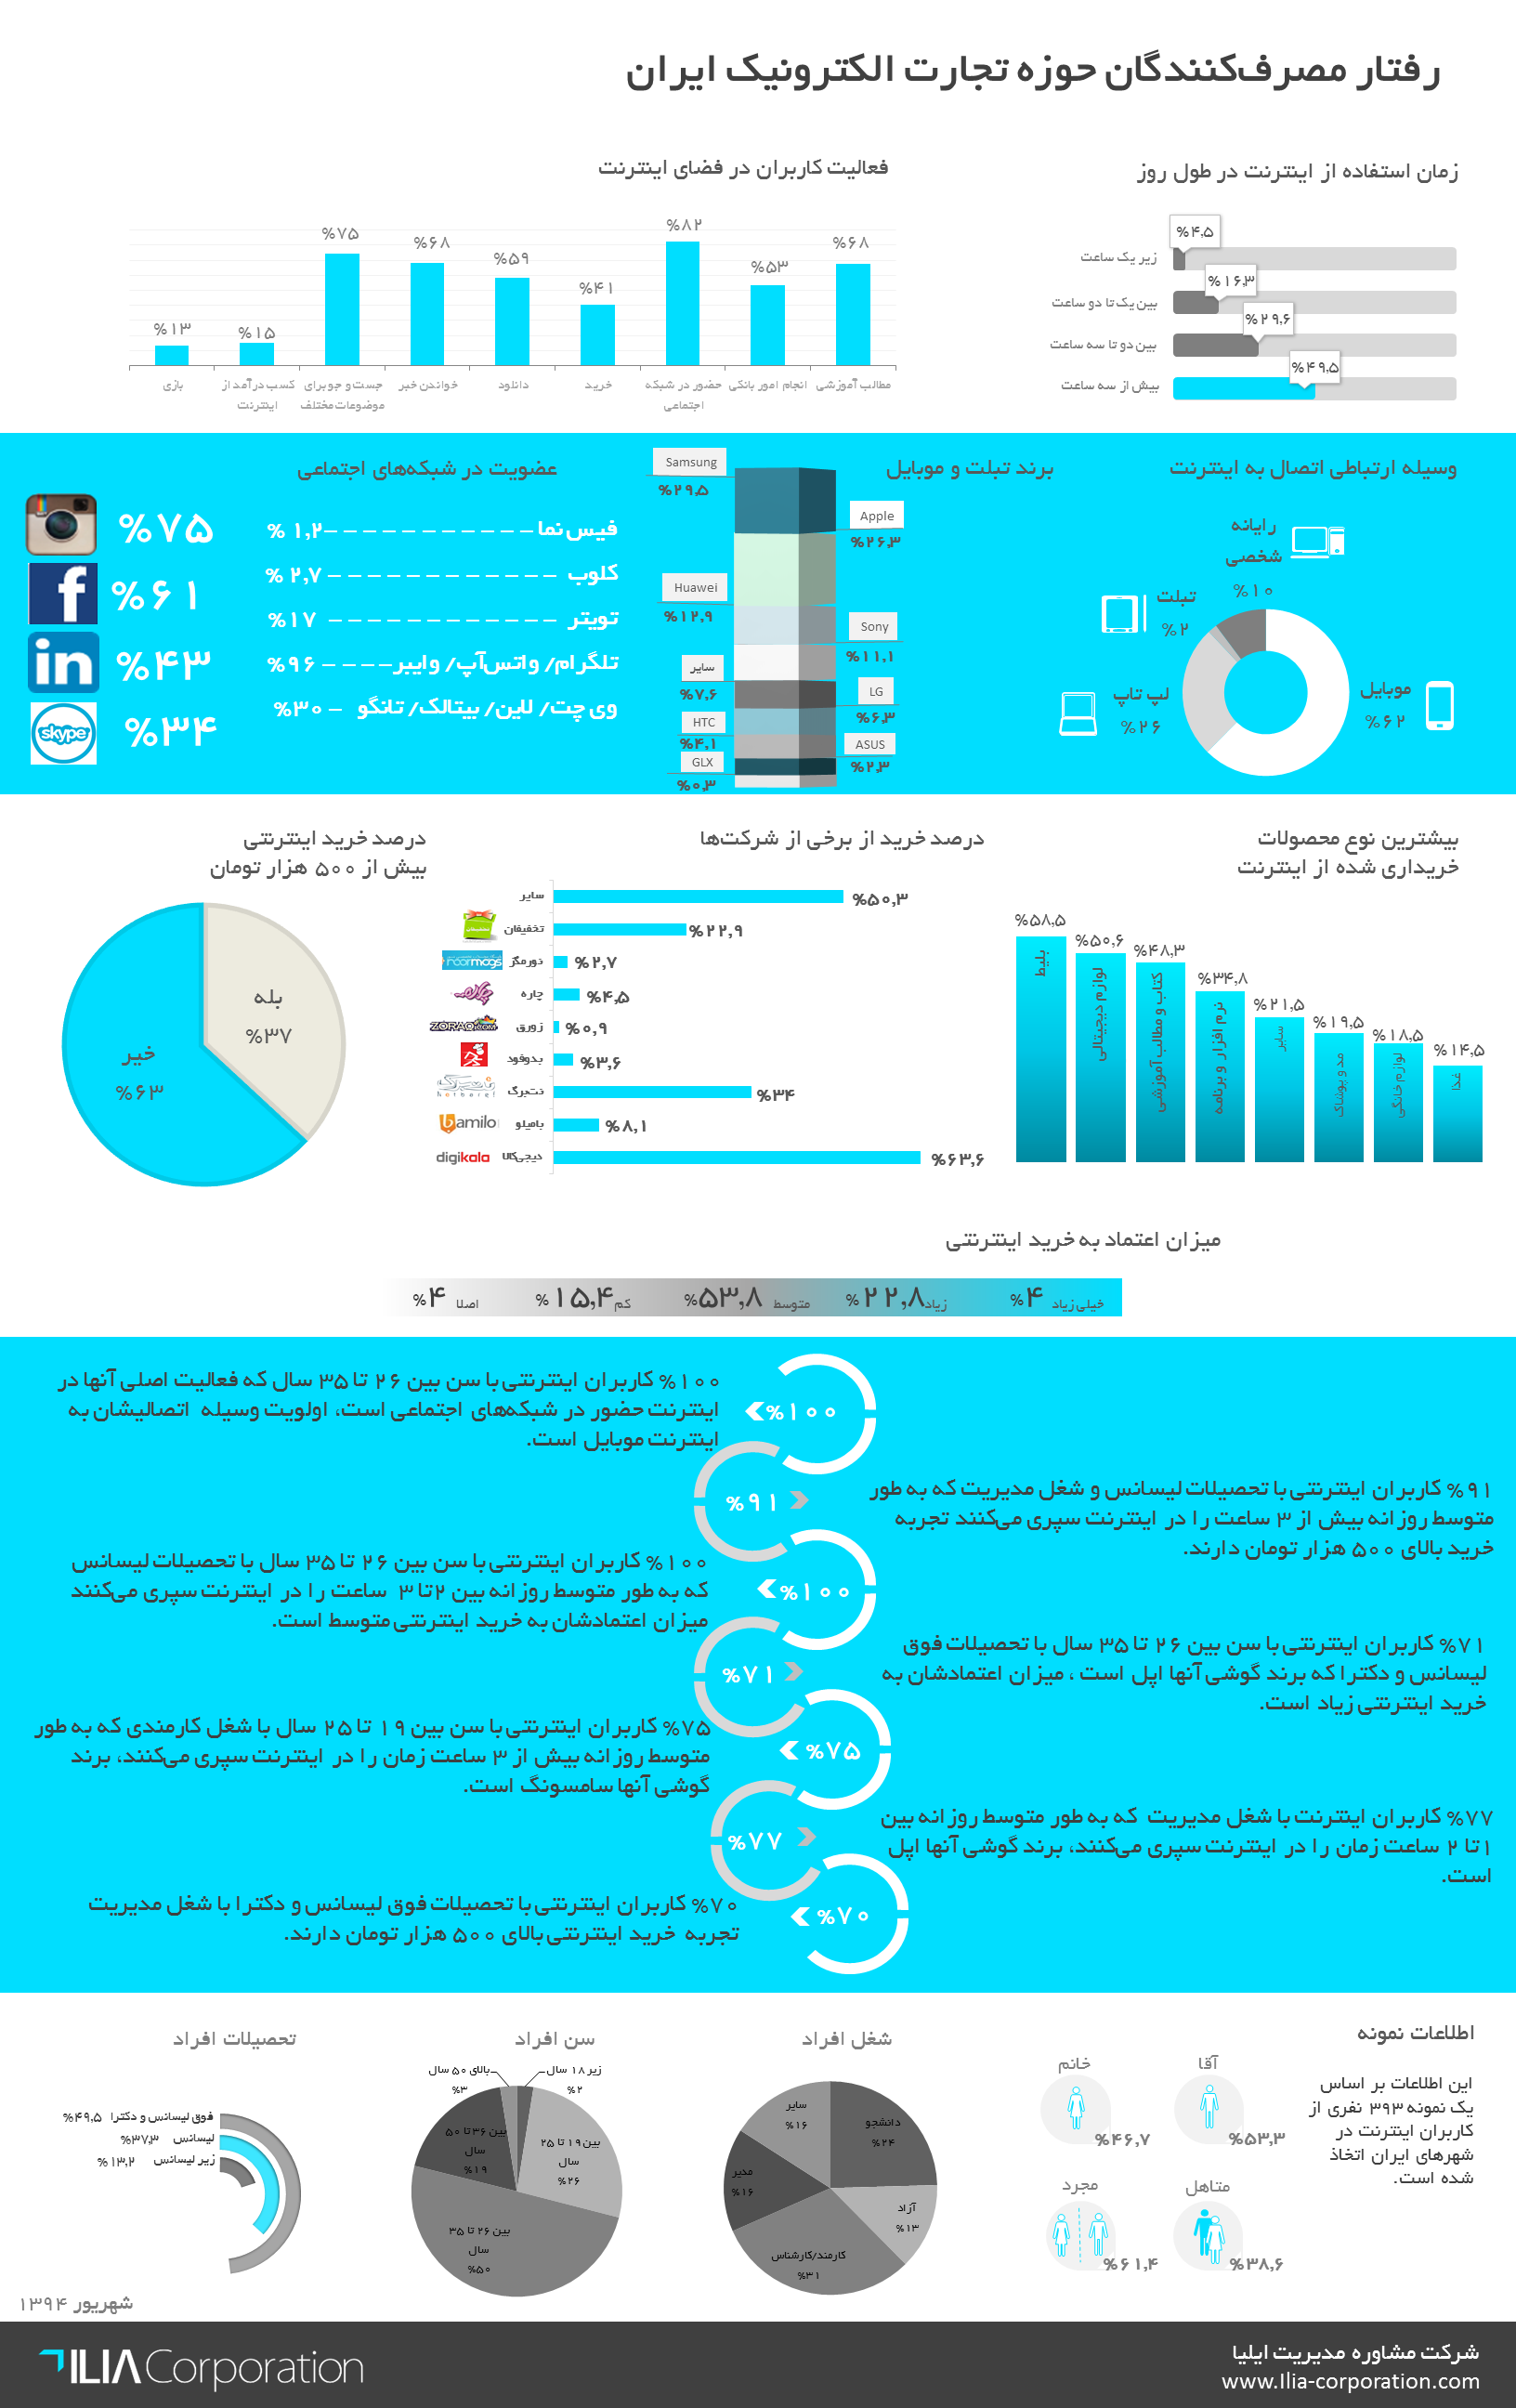 http://drstartup.ir/wp-content/uploads/2015/12/ILIA-Corporation-Research-Result-E-Commerce-in-Iran.png